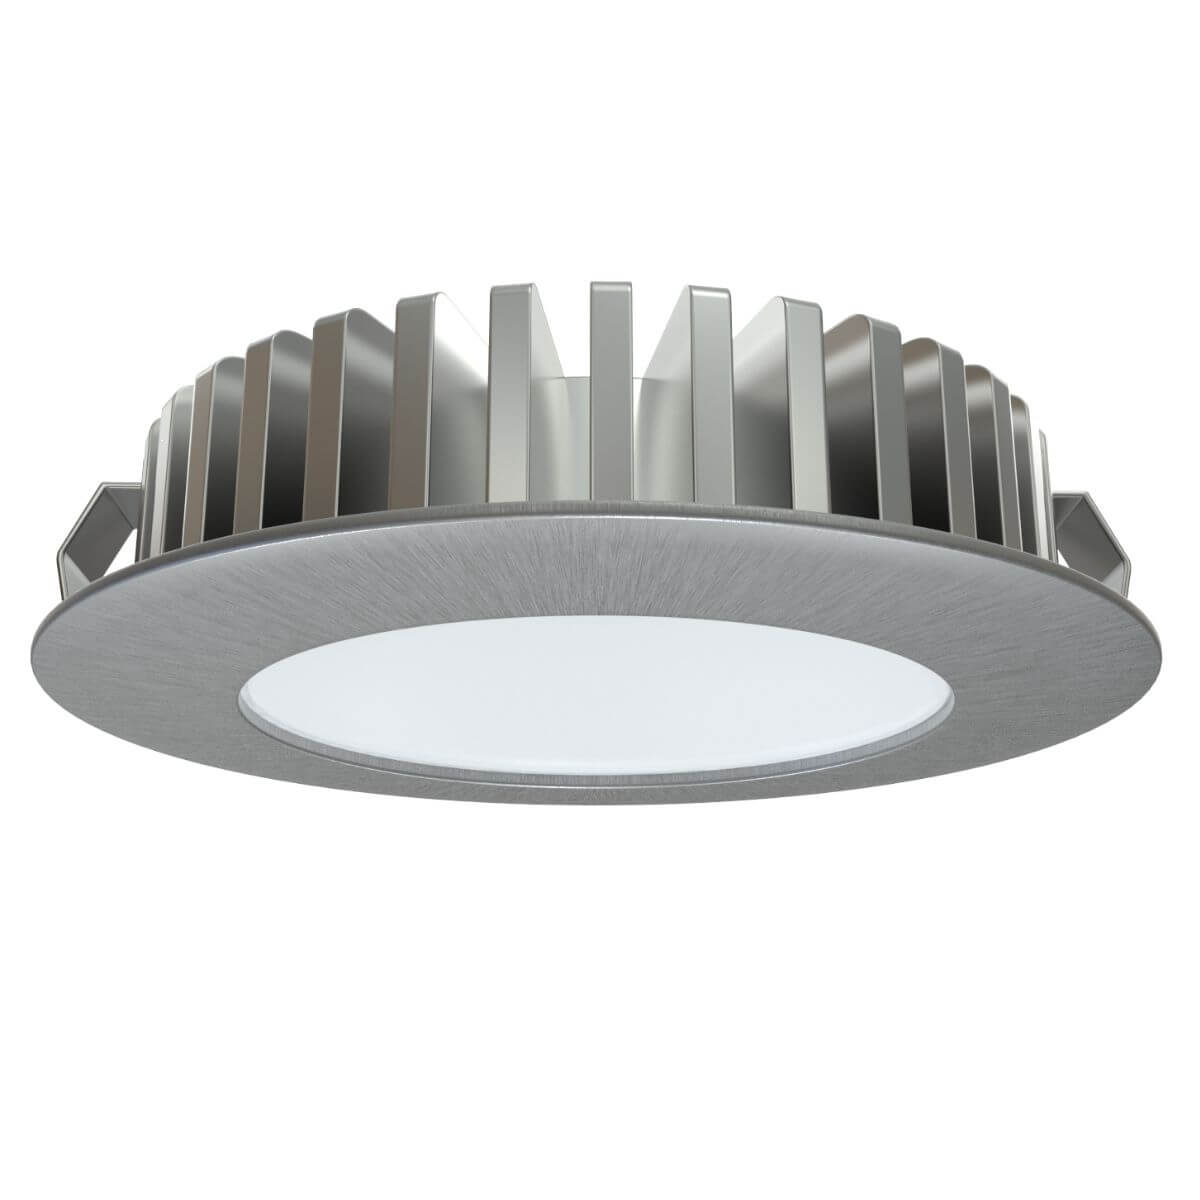 View High Brightness Recessed LED UnderCabinet Light Warm White and Neutral White information